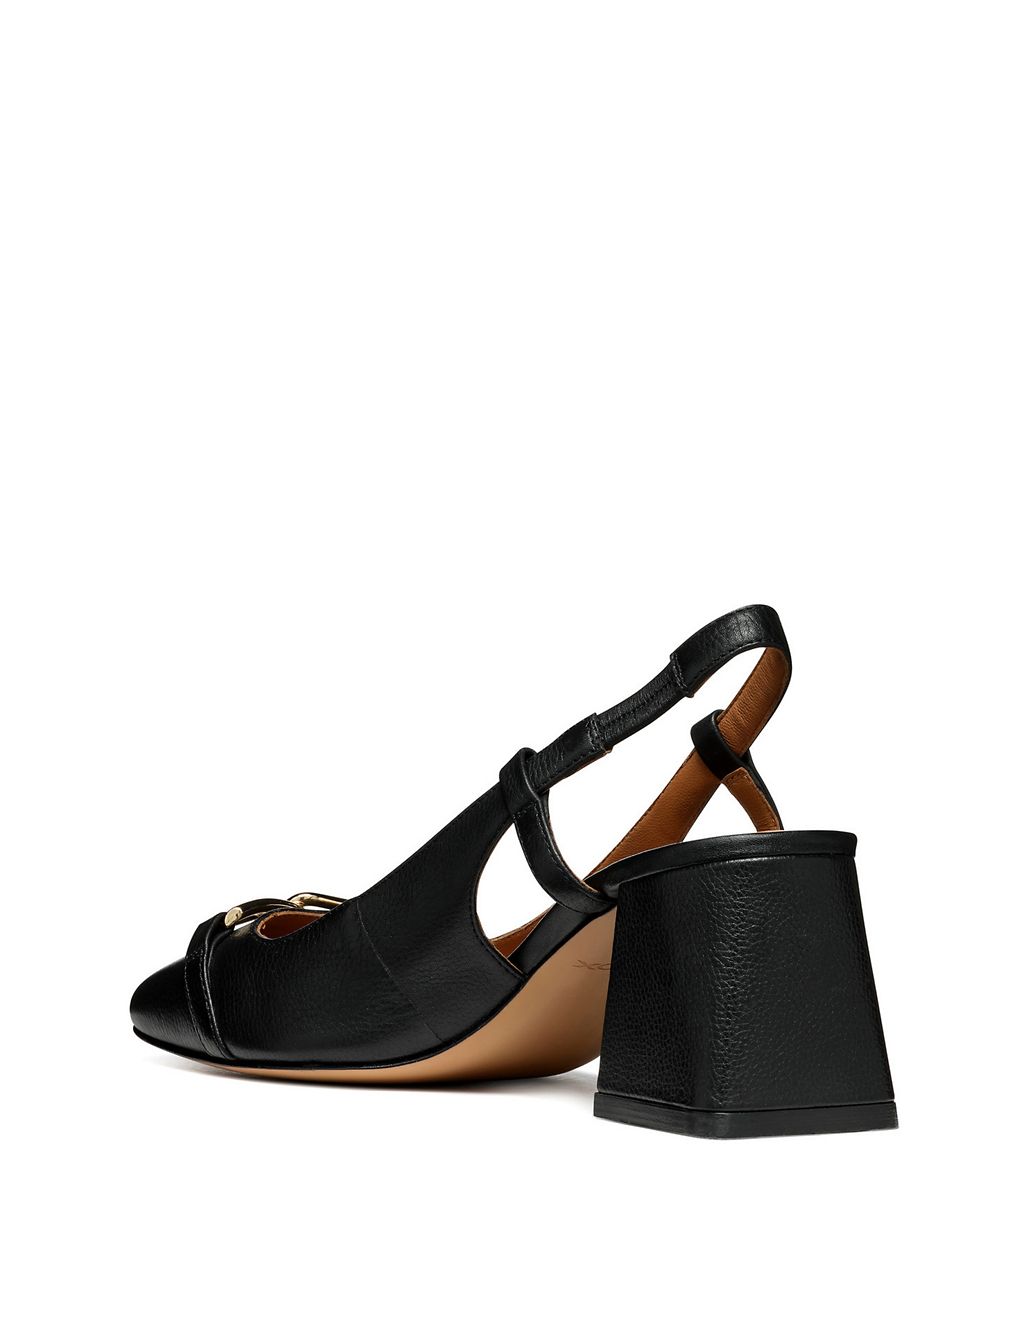 Leather Block Heel Square Toe Slingback Shoes 2 of 6